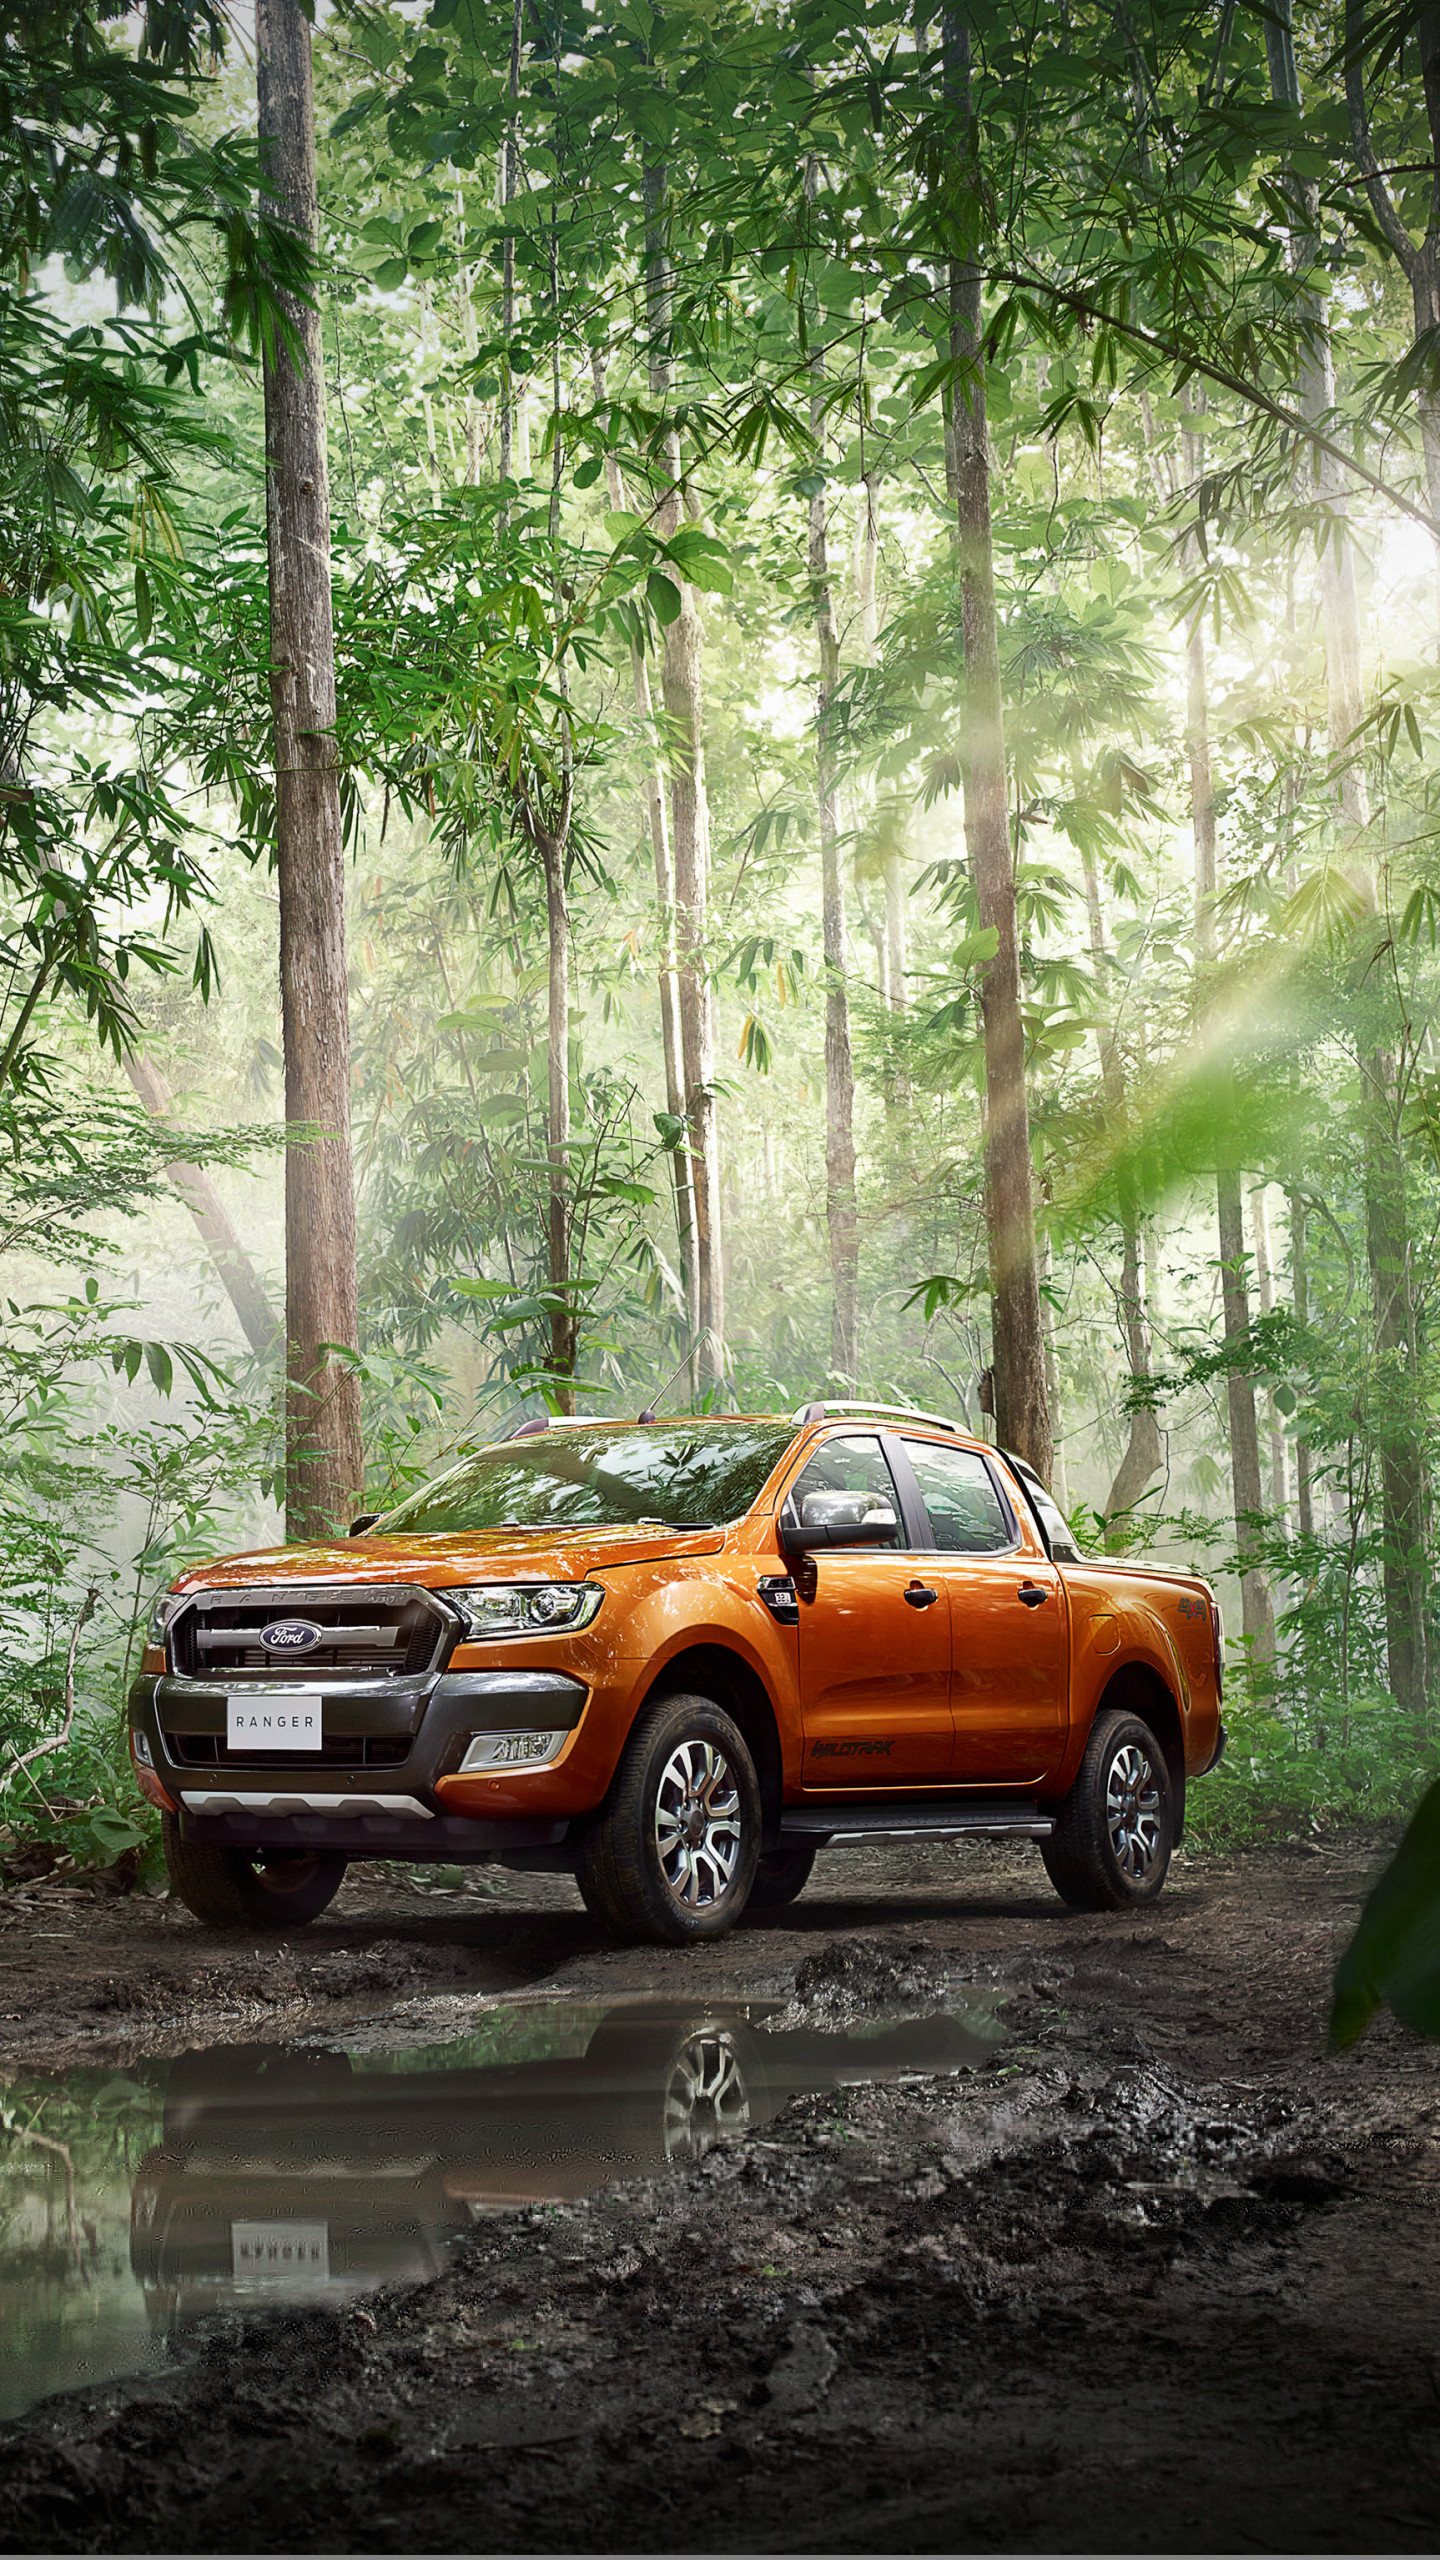 Wallpaper Ford Ranger Forest Side View Puddle Ford Ranger Wildtrak 2019 1440x2560 Wallpaper Teahub Io